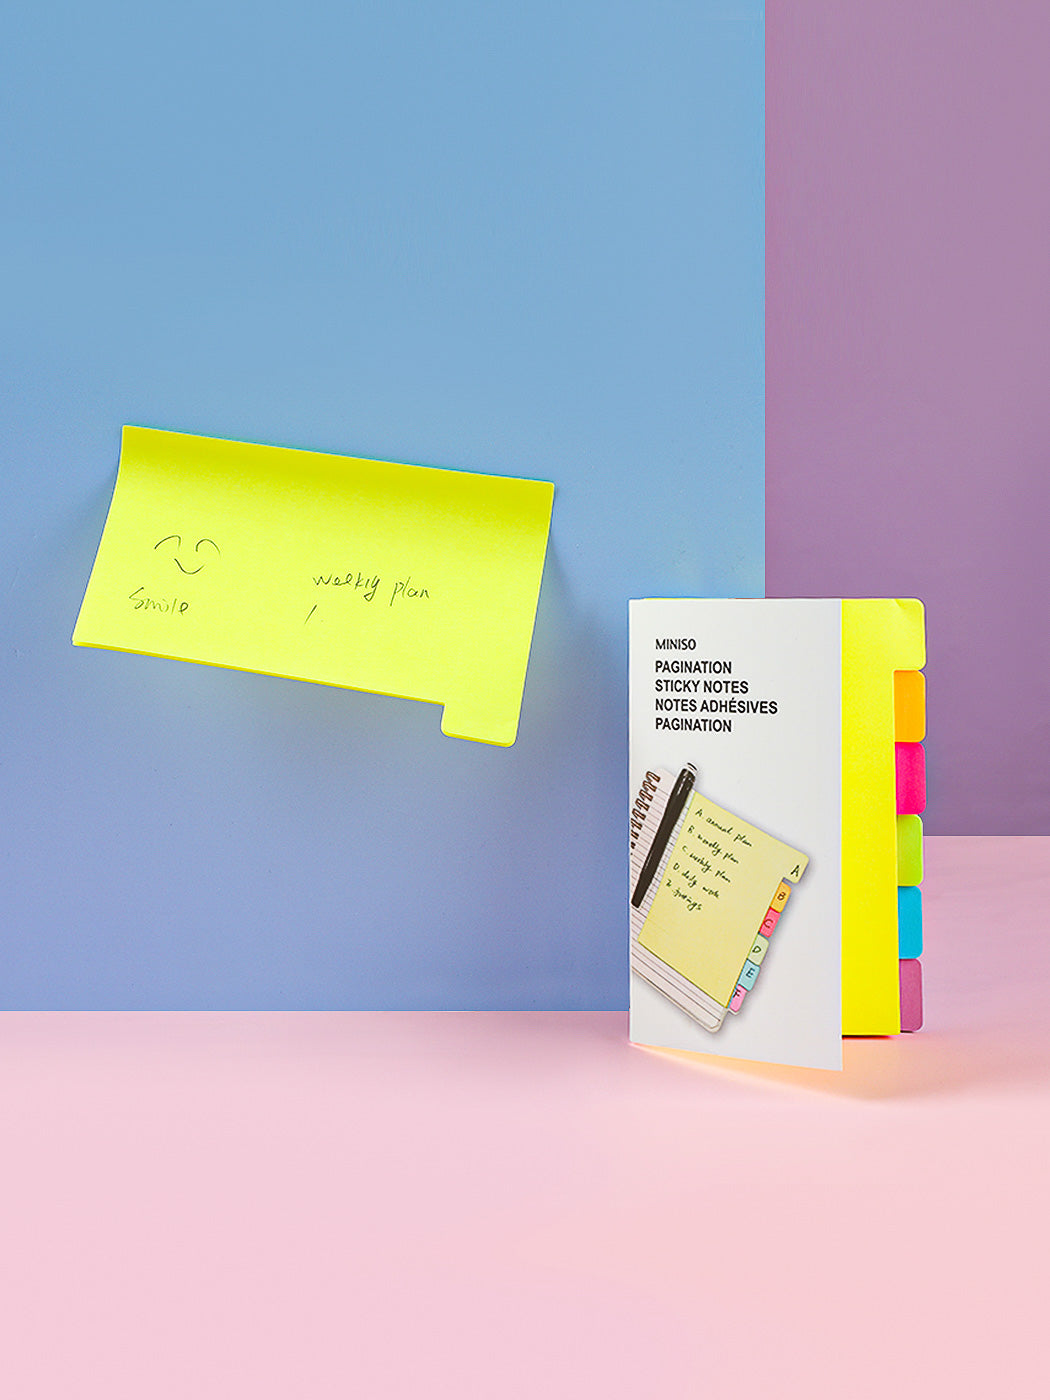 MINISO PAGINATION STICKY NOTES(6 COLORS) 2008674610103 STATIONERY